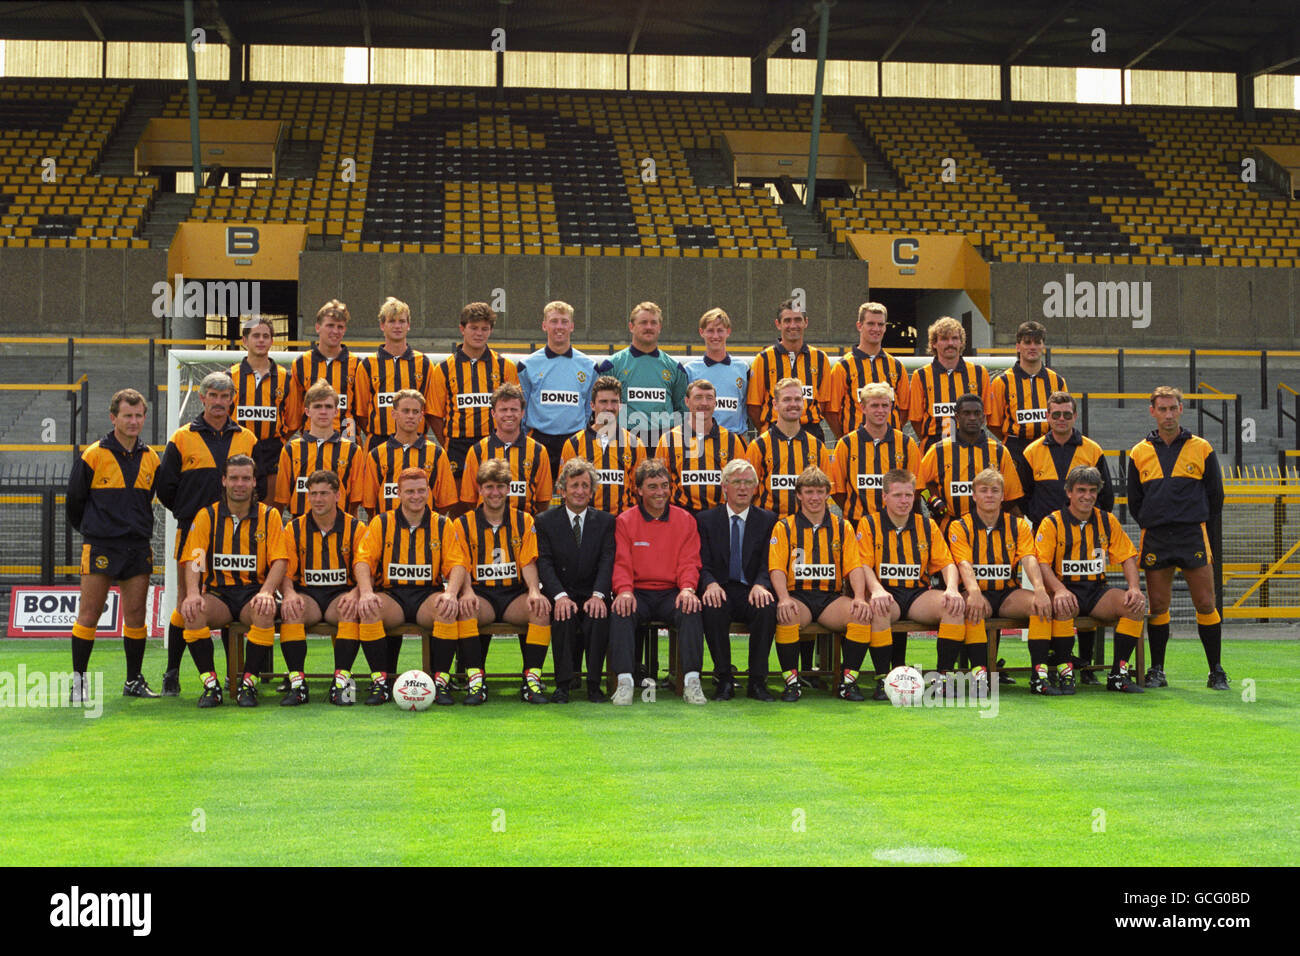 Soccer - League Division Two - Hull City FC Photocall - Boothferry Park Stock Photo